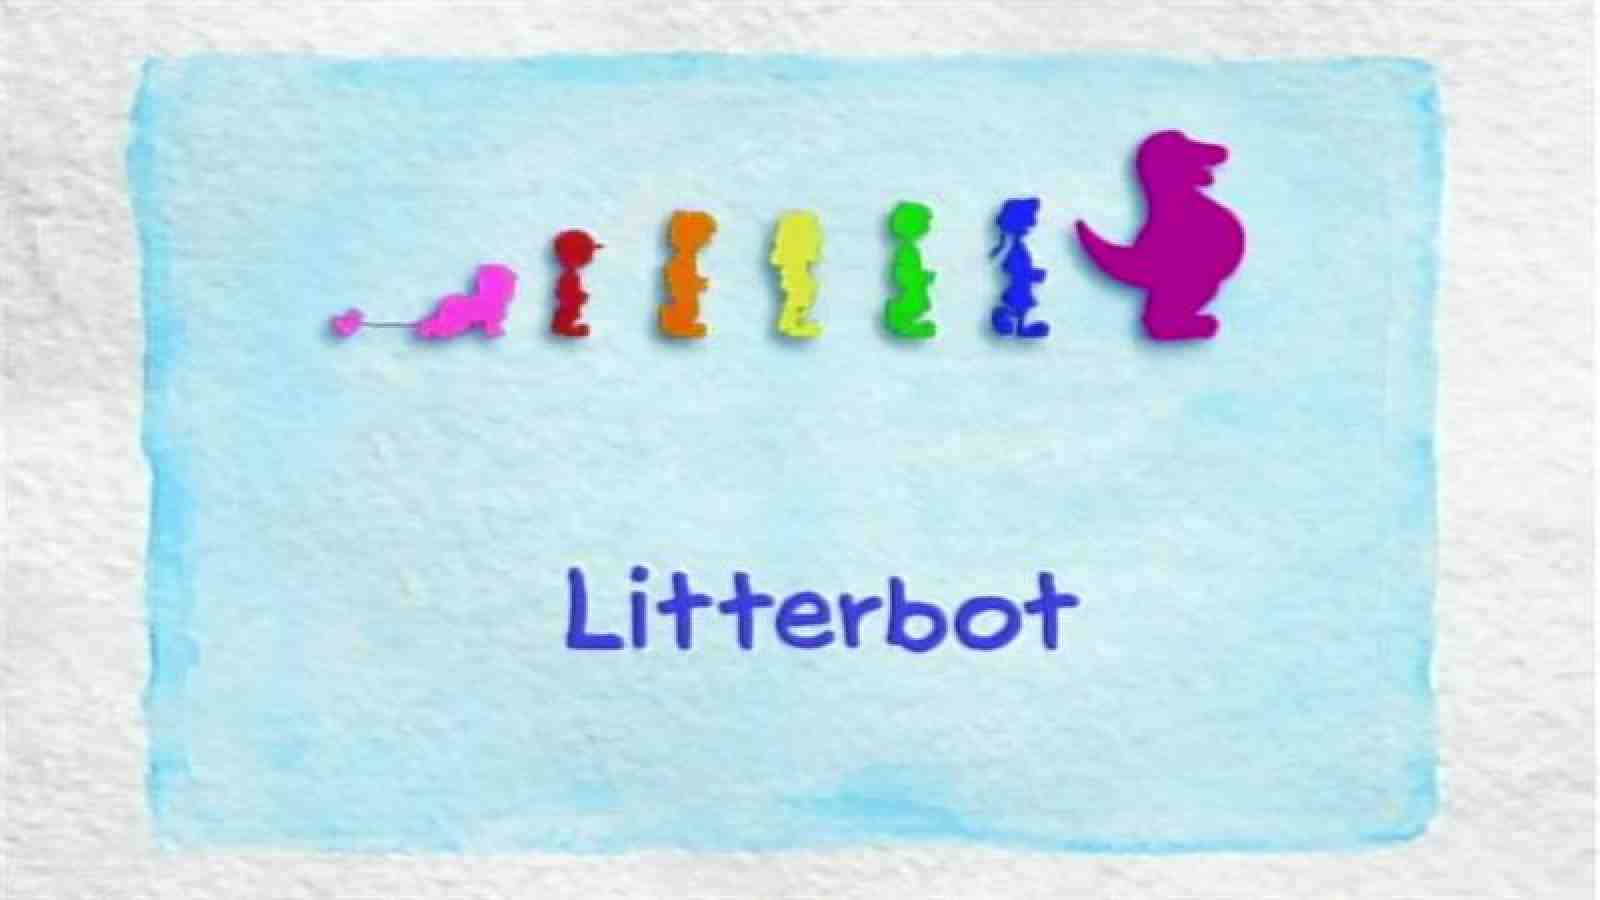 The Magic Words / Litterbot